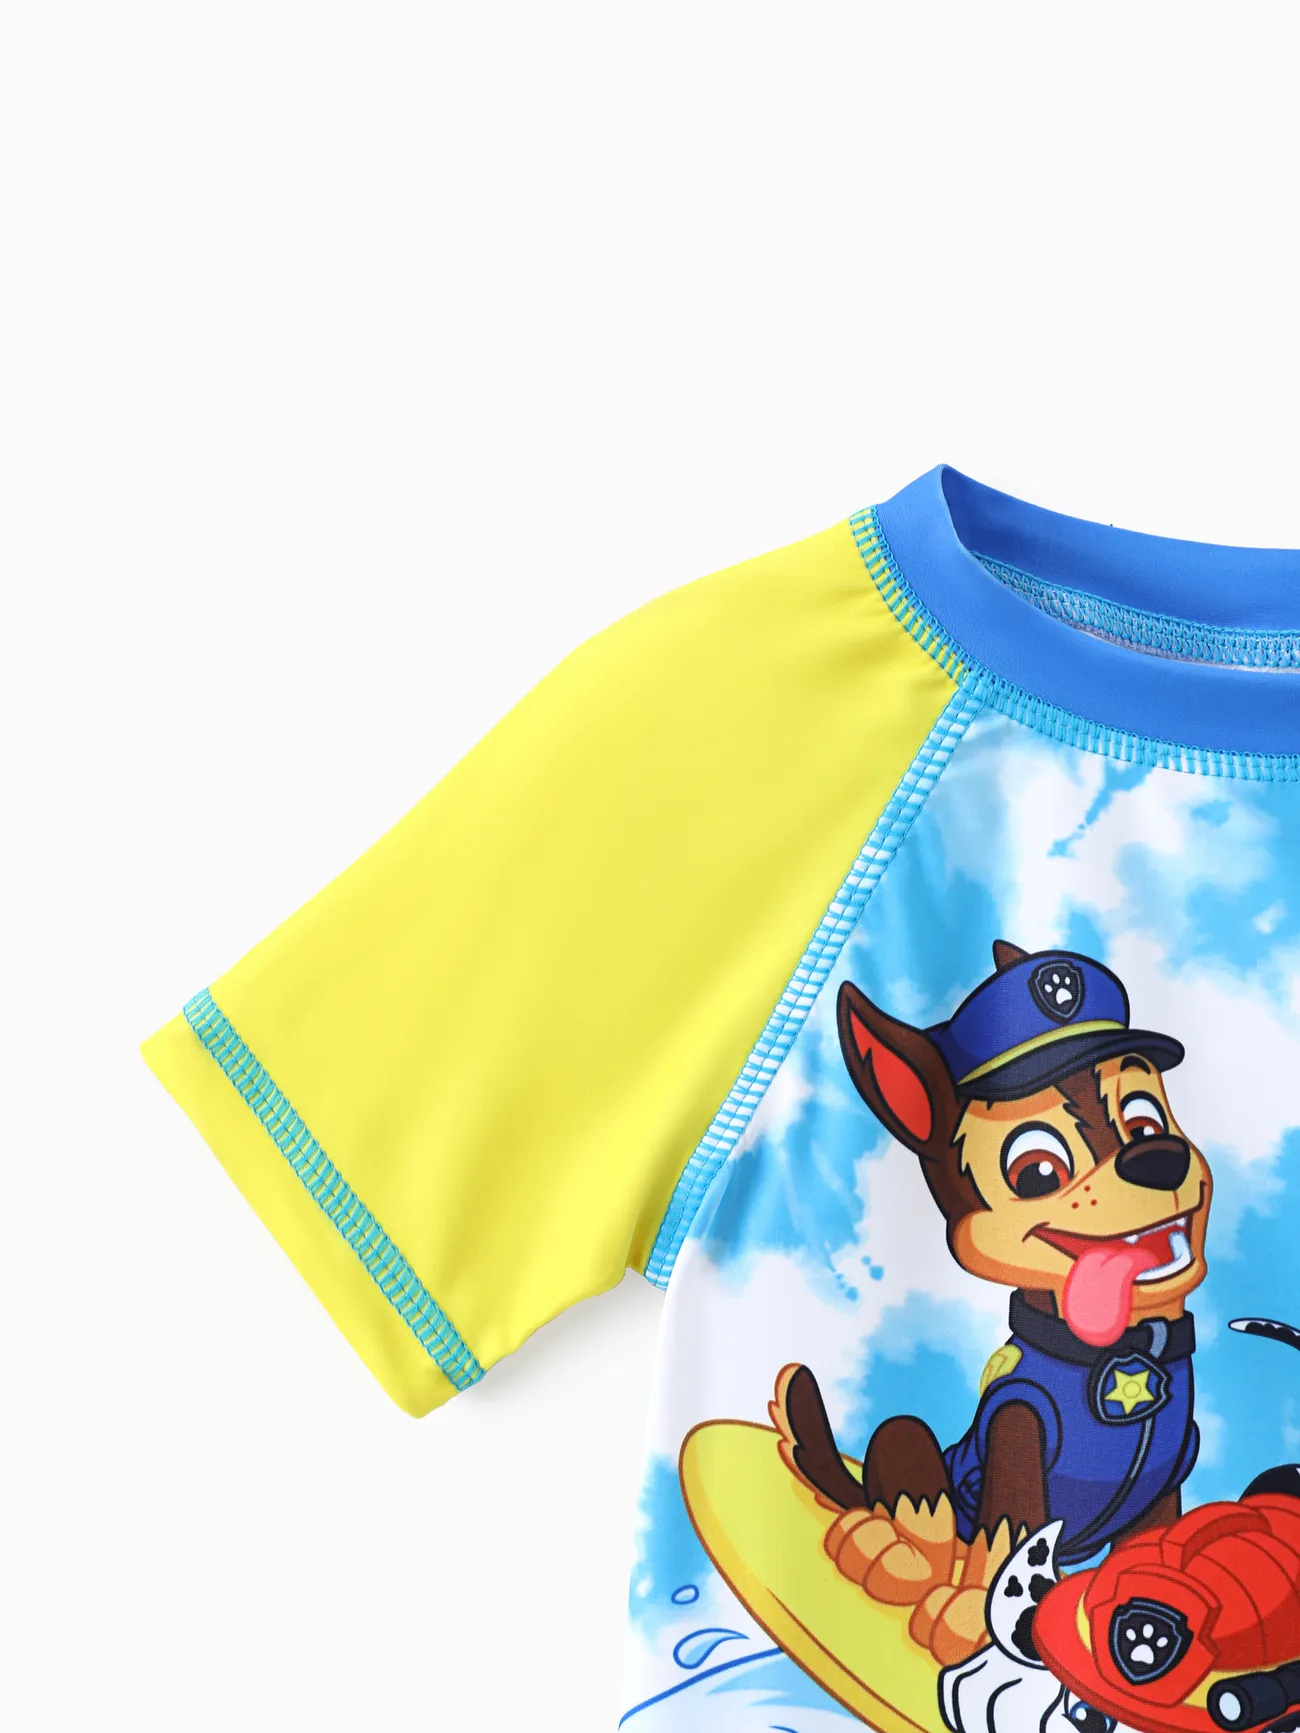 PAW Patrol Toddler Boy 2pcs Colorblock Tops and Trunks Swimsuit Navy big image 1